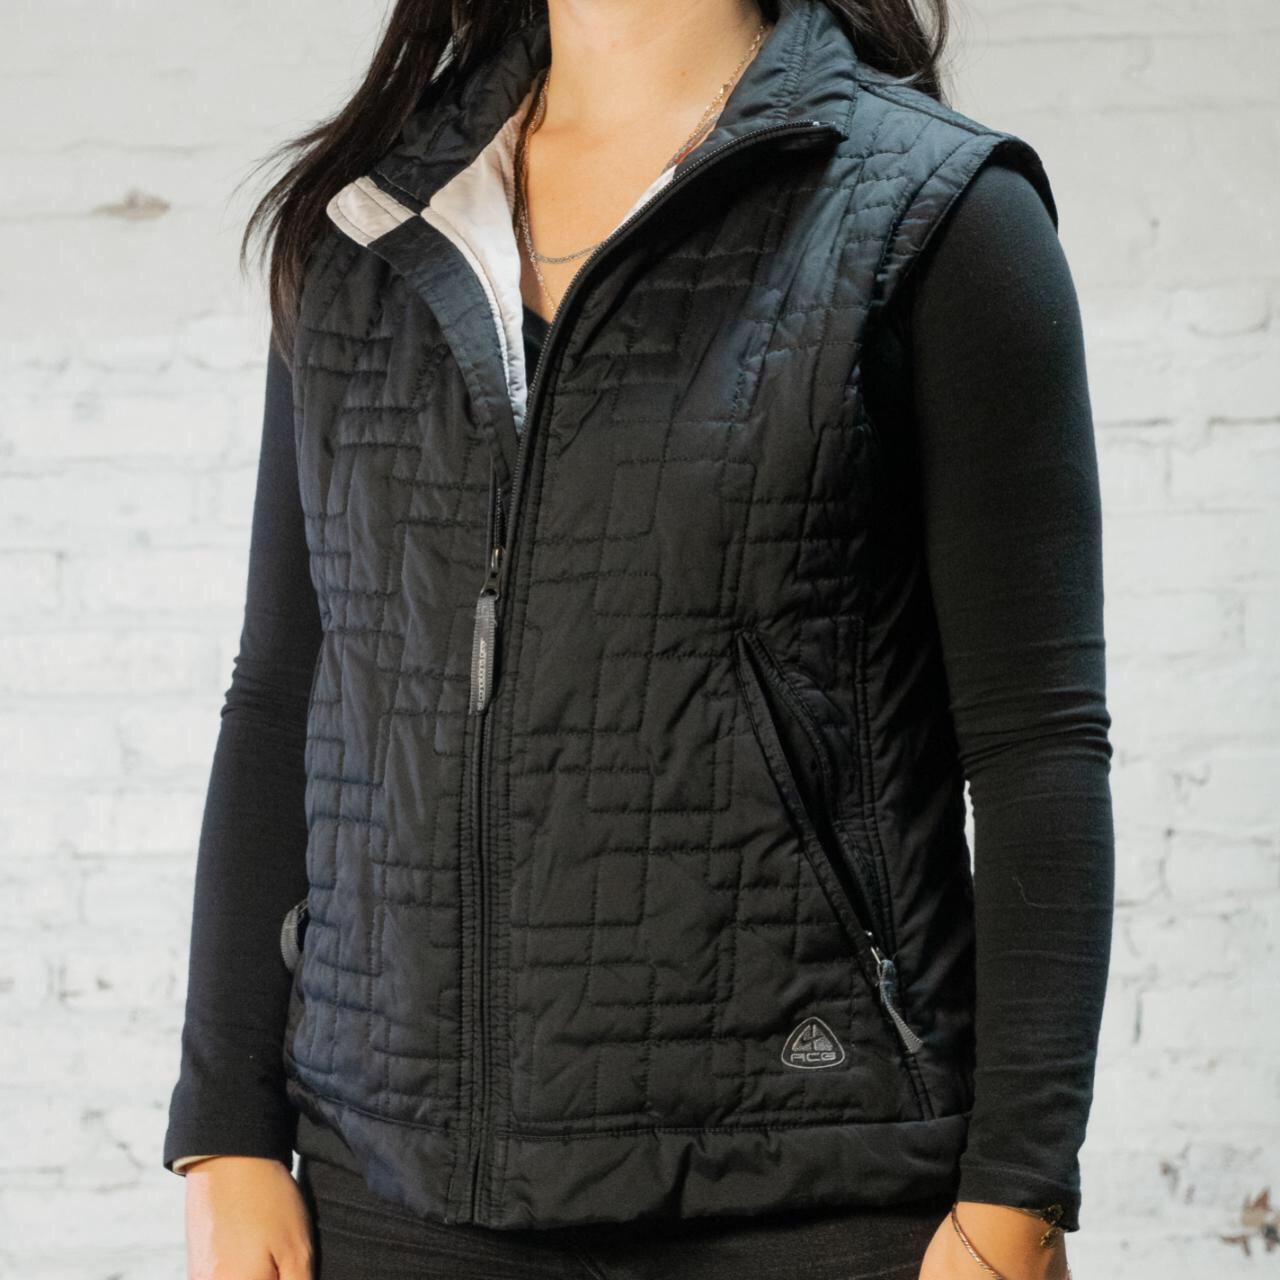 Product Image 1 - Black Nike ACG Quilted Vest

Black